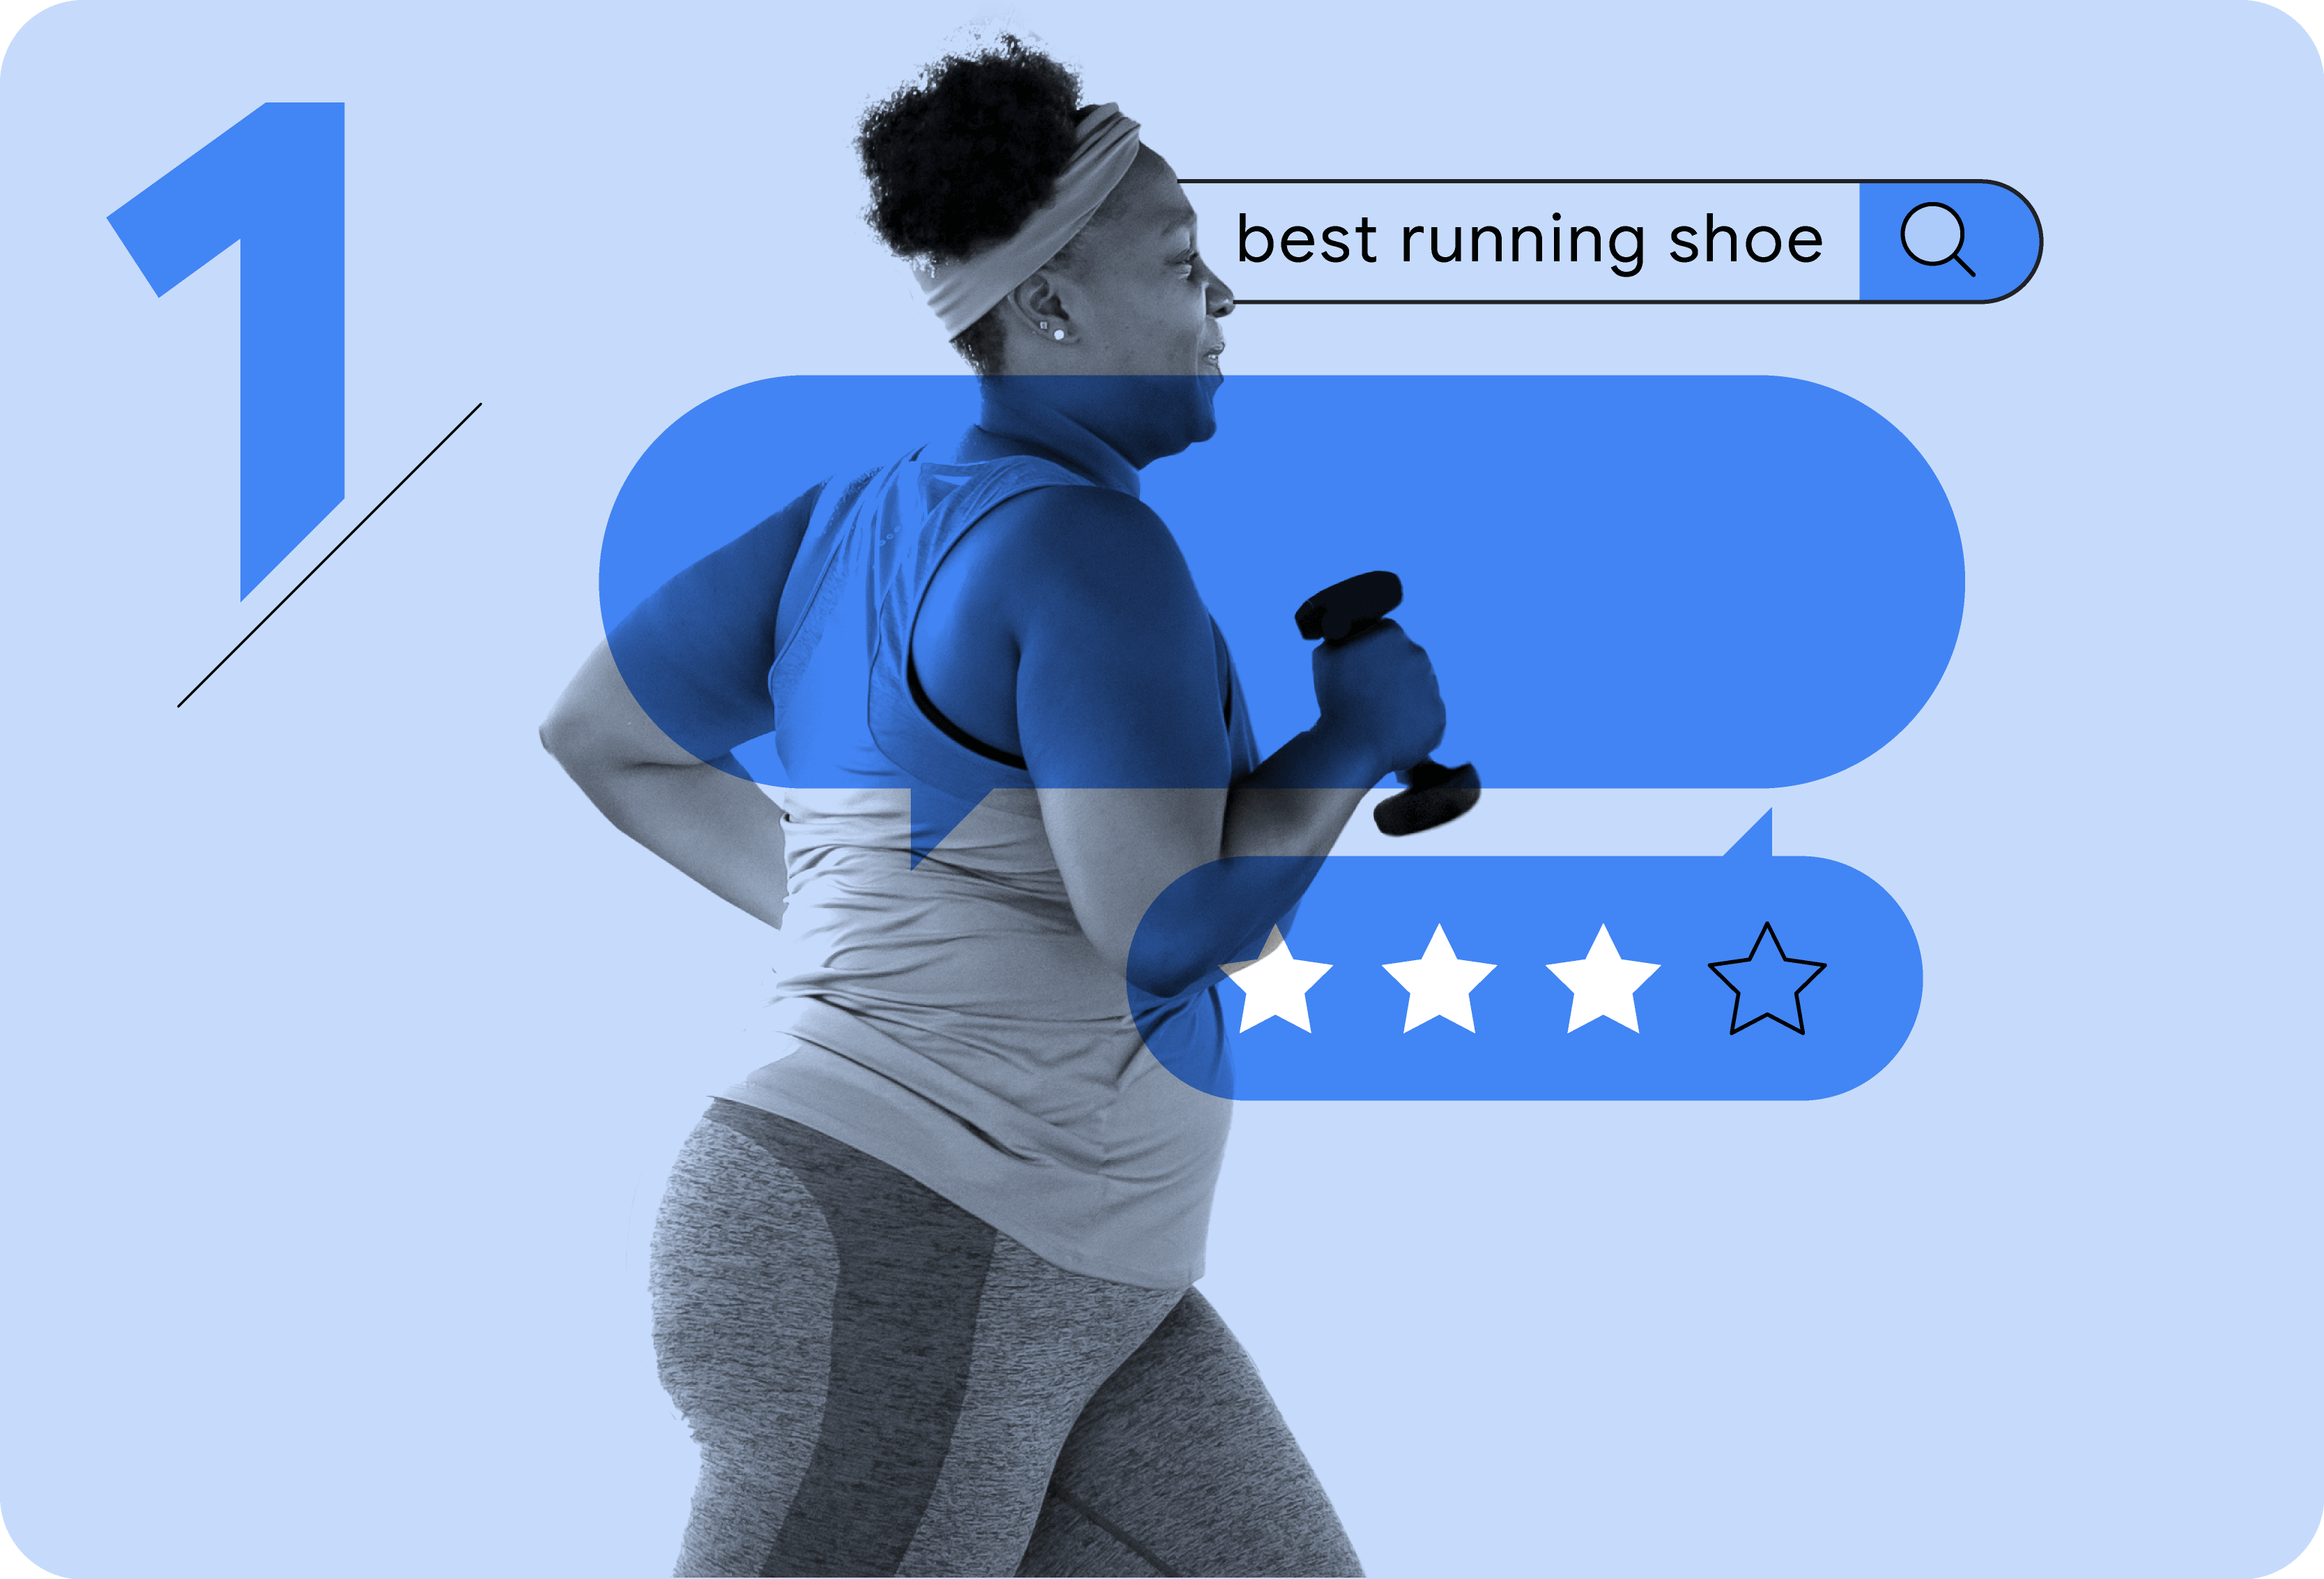 A person with short curly hair in athletic clothing and wearing a headband runs while holding dumbbells. The search term “best running shoe” appears in a search bar at top, and 3 out of 4 stars are lit up in a text bubble.